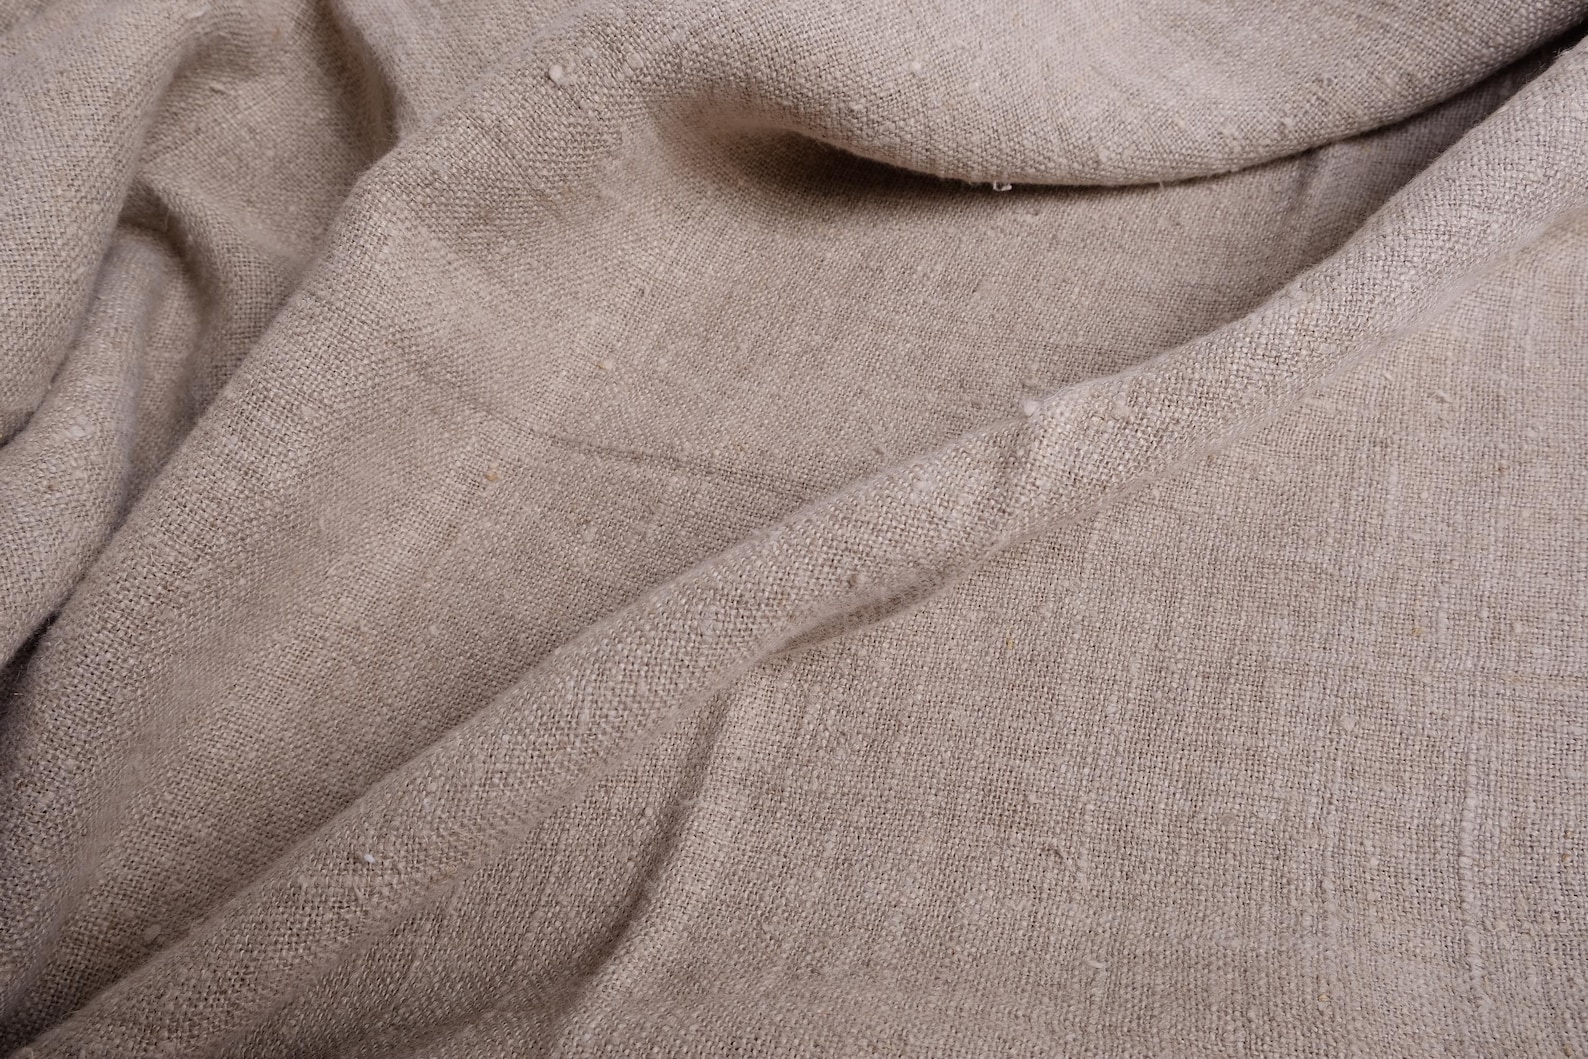 Pure Linen Fabric Very Heavy Weight Undyed Prewashed. 280 - Etsy